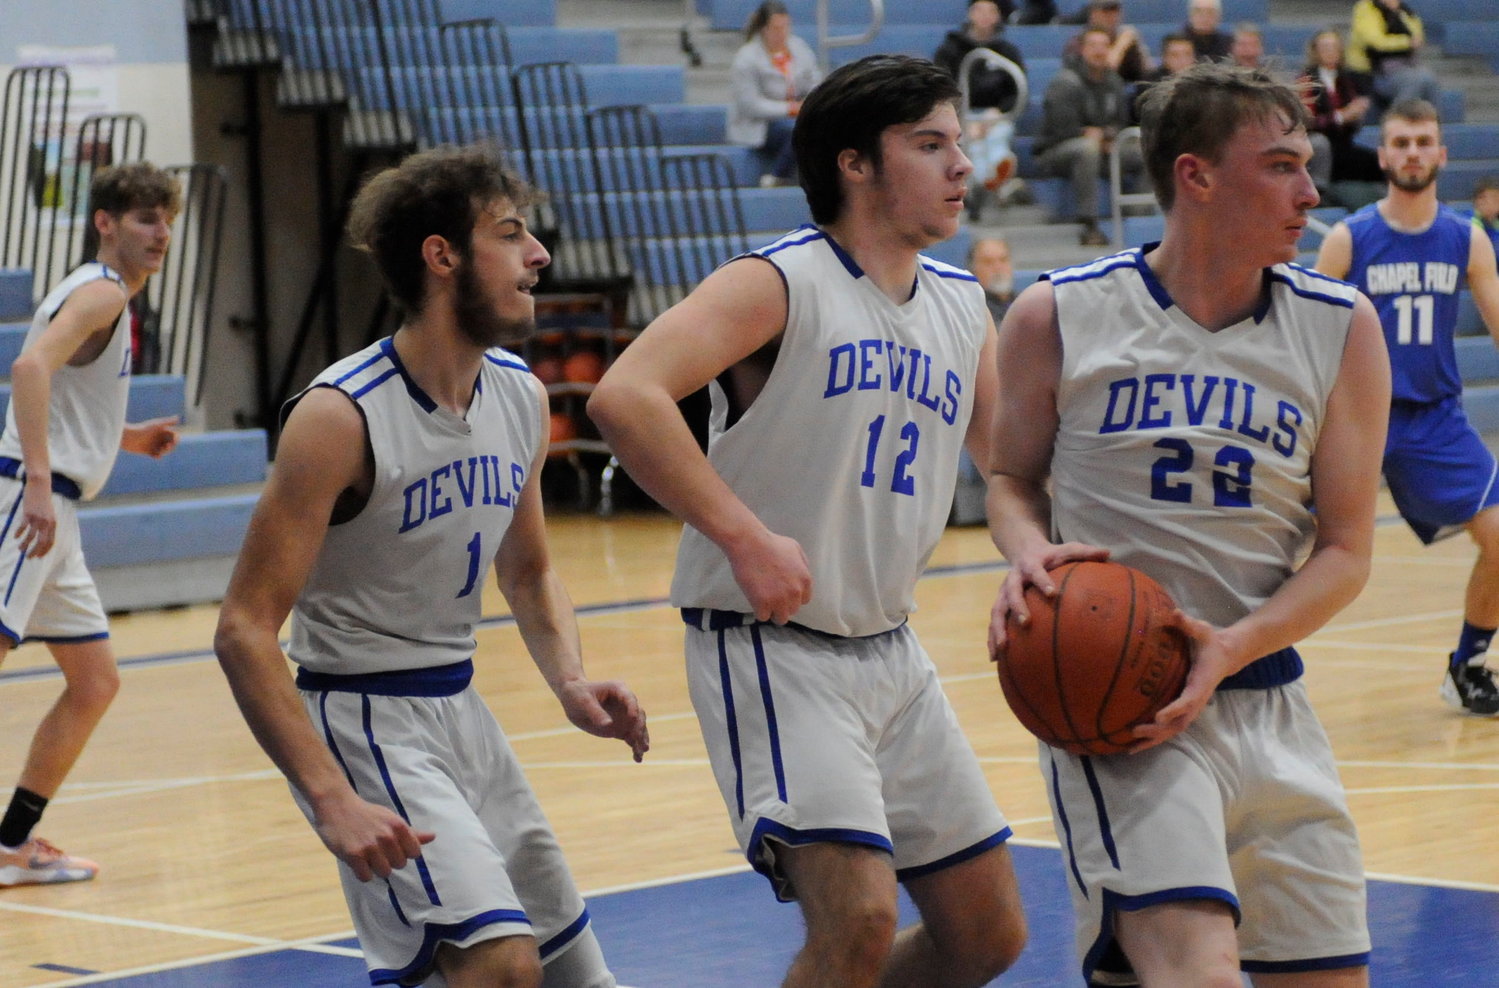 Triple Devils. Roscoe’s Anthony Teipelke scored 16 points for the Blue Devils. He is pictured with teammates Jayson Meola and Russ Hodge.